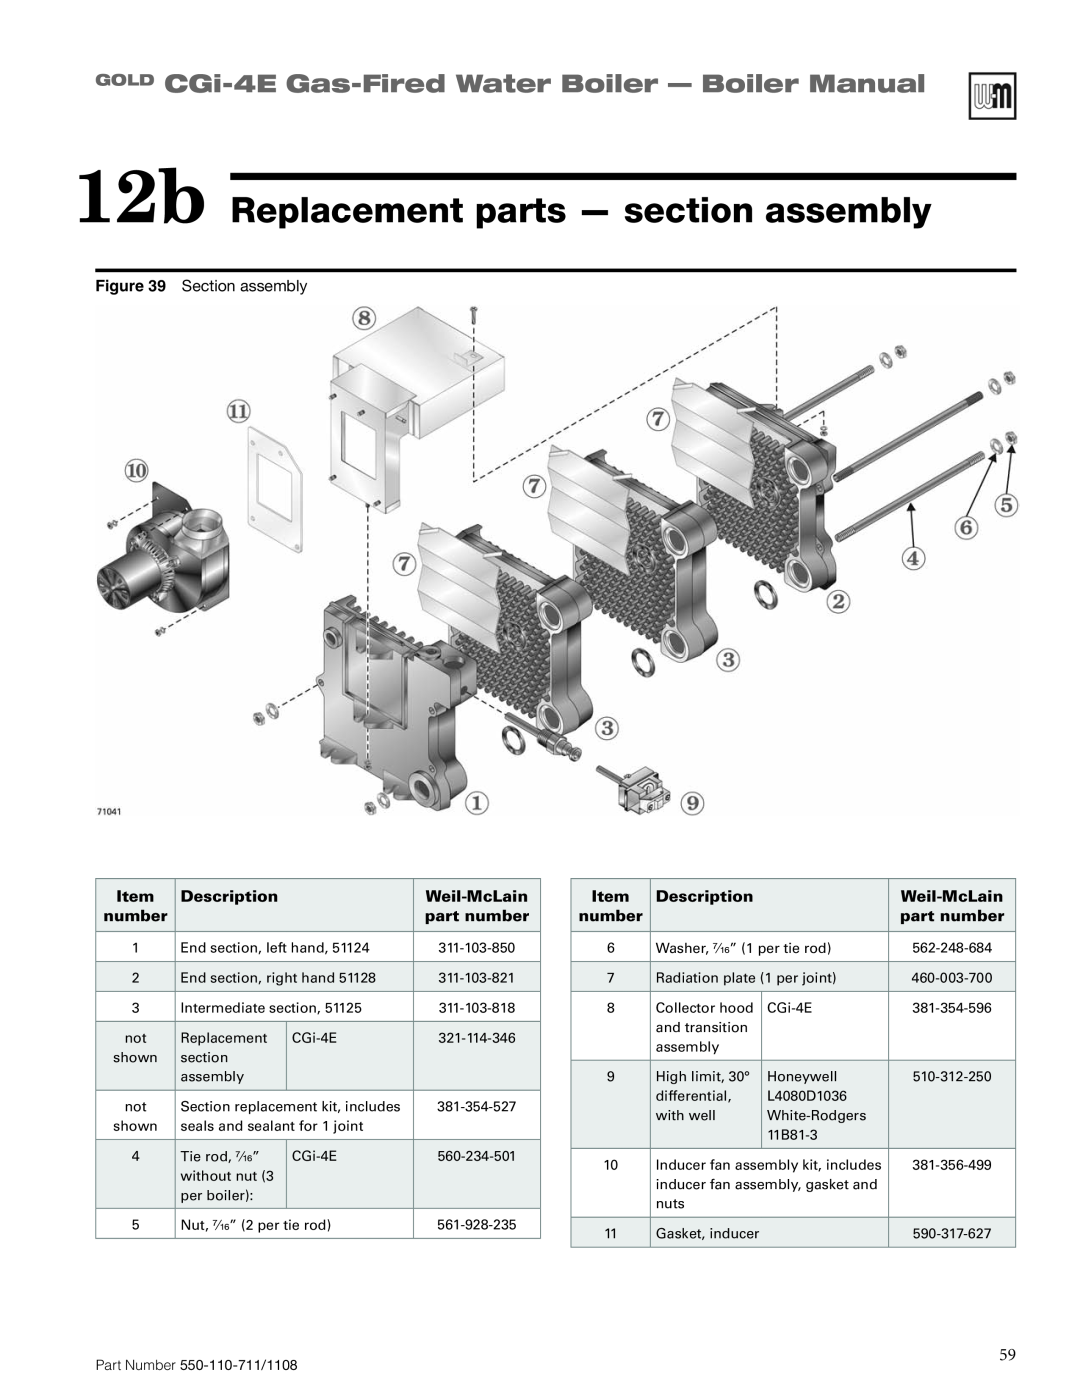 Weil-McLain CGI-4E manual 12b Replacement parts - section assembly, GOLD CGi-4E Gas-FiredWater Boiler - Boiler Manual 